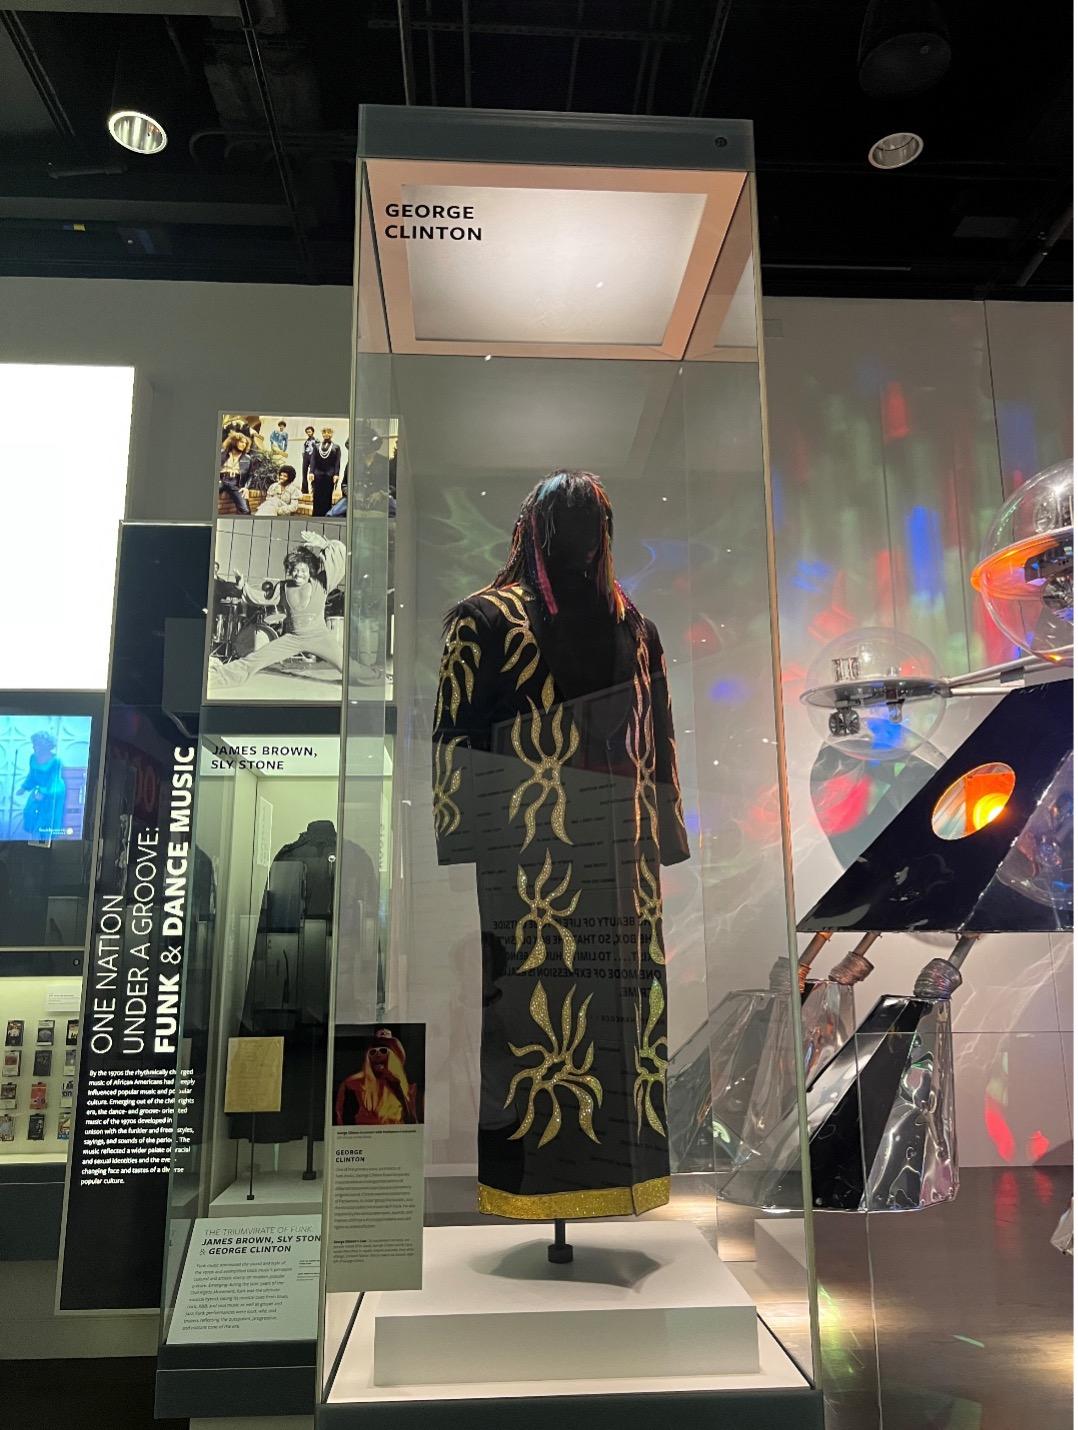 A six foot tall museum display case shows a mannequin wearing George Clinton’s black rainbow wig with rainbow accents. The mannequin is also wearing a floor length black robe with golden sunflowers and Swarovski crystals.